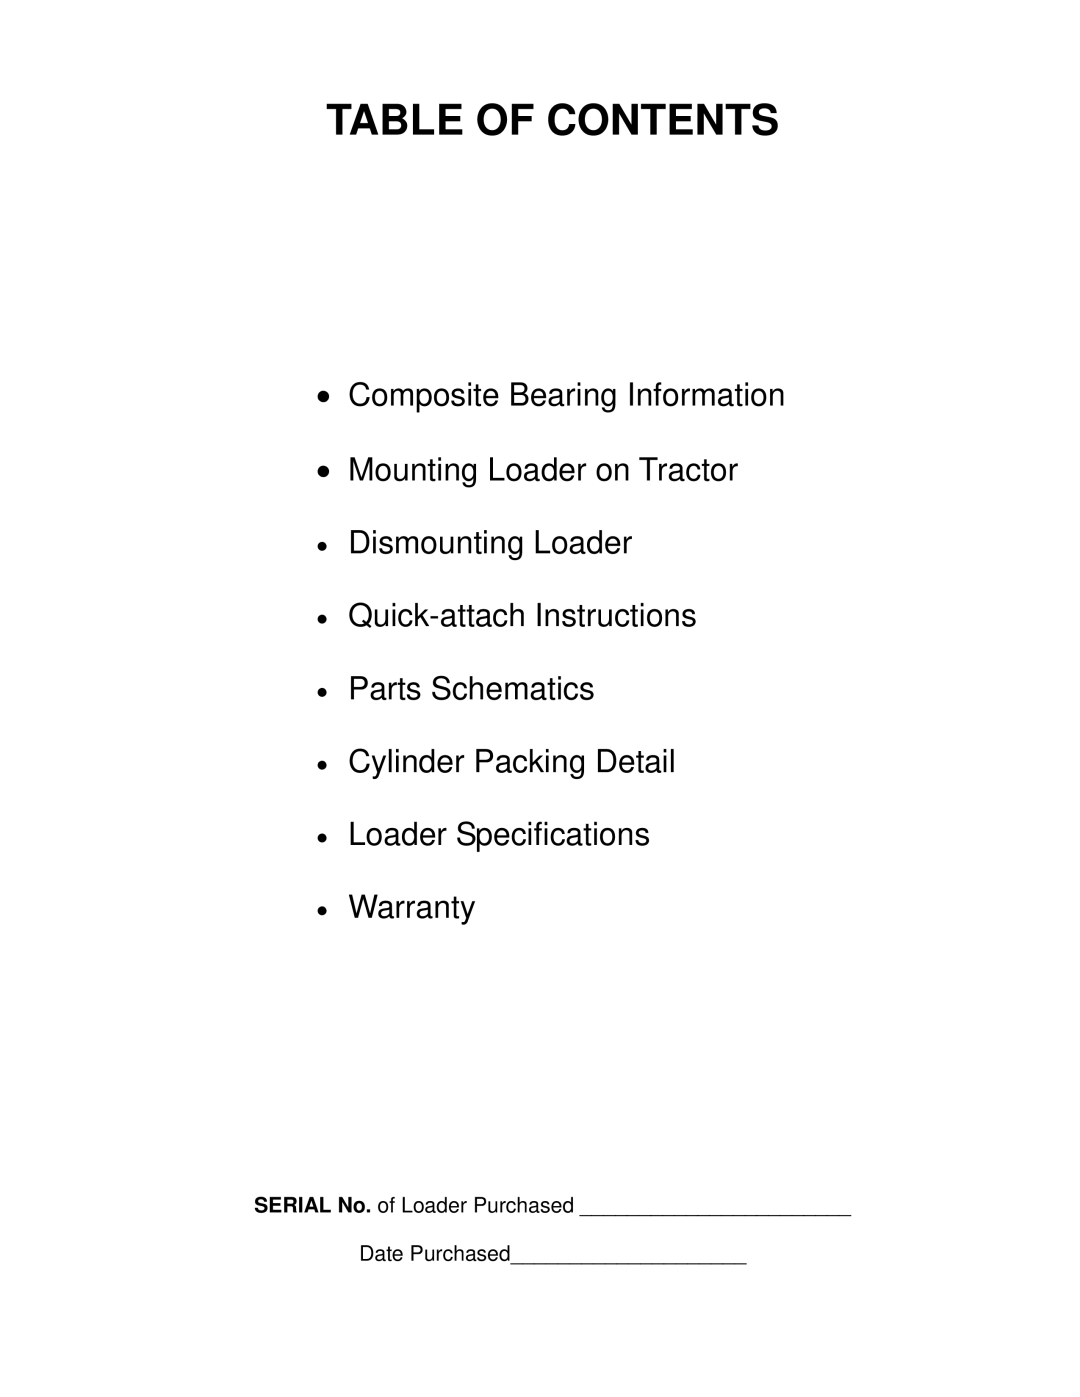 MK Sound GP25 owner manual Table Of Contents, Composite Bearing Information Mounting Loader on Tractor 